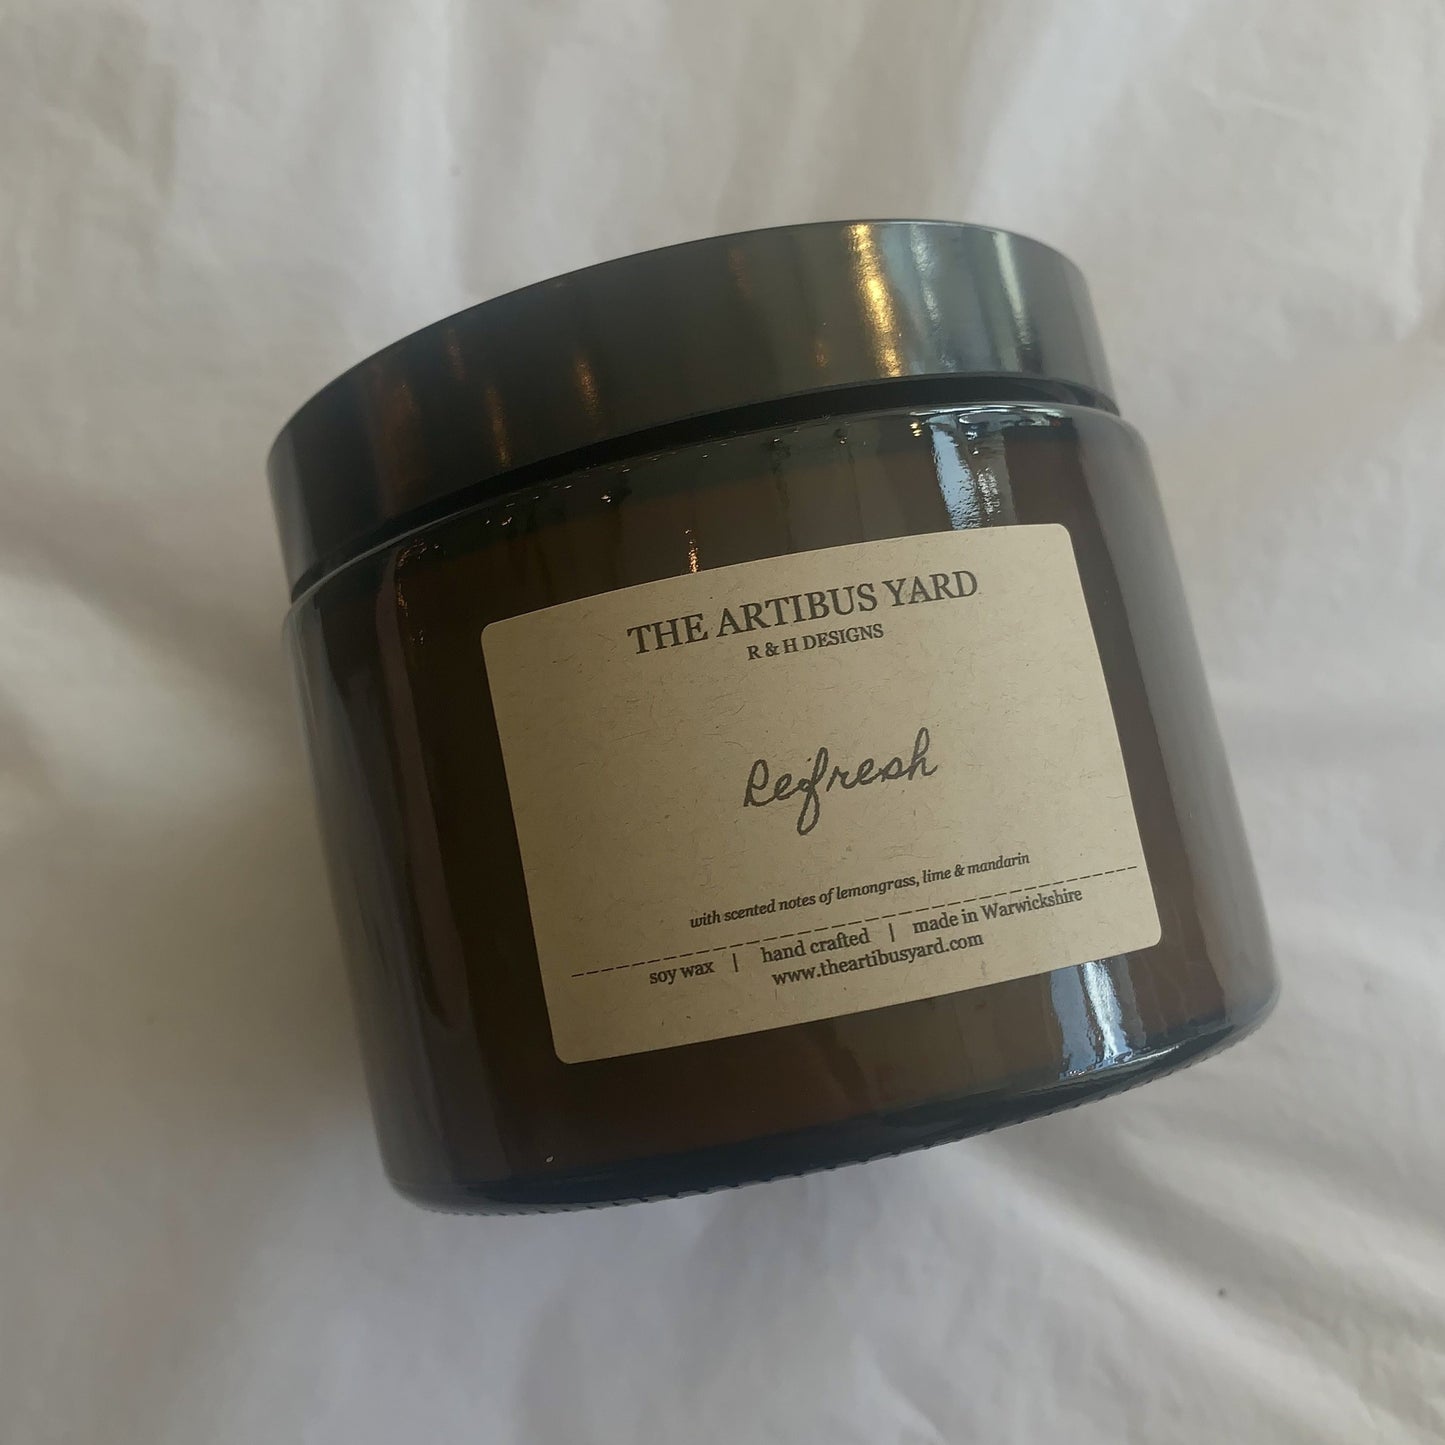 Refresh, Grand Soy Wax Candle